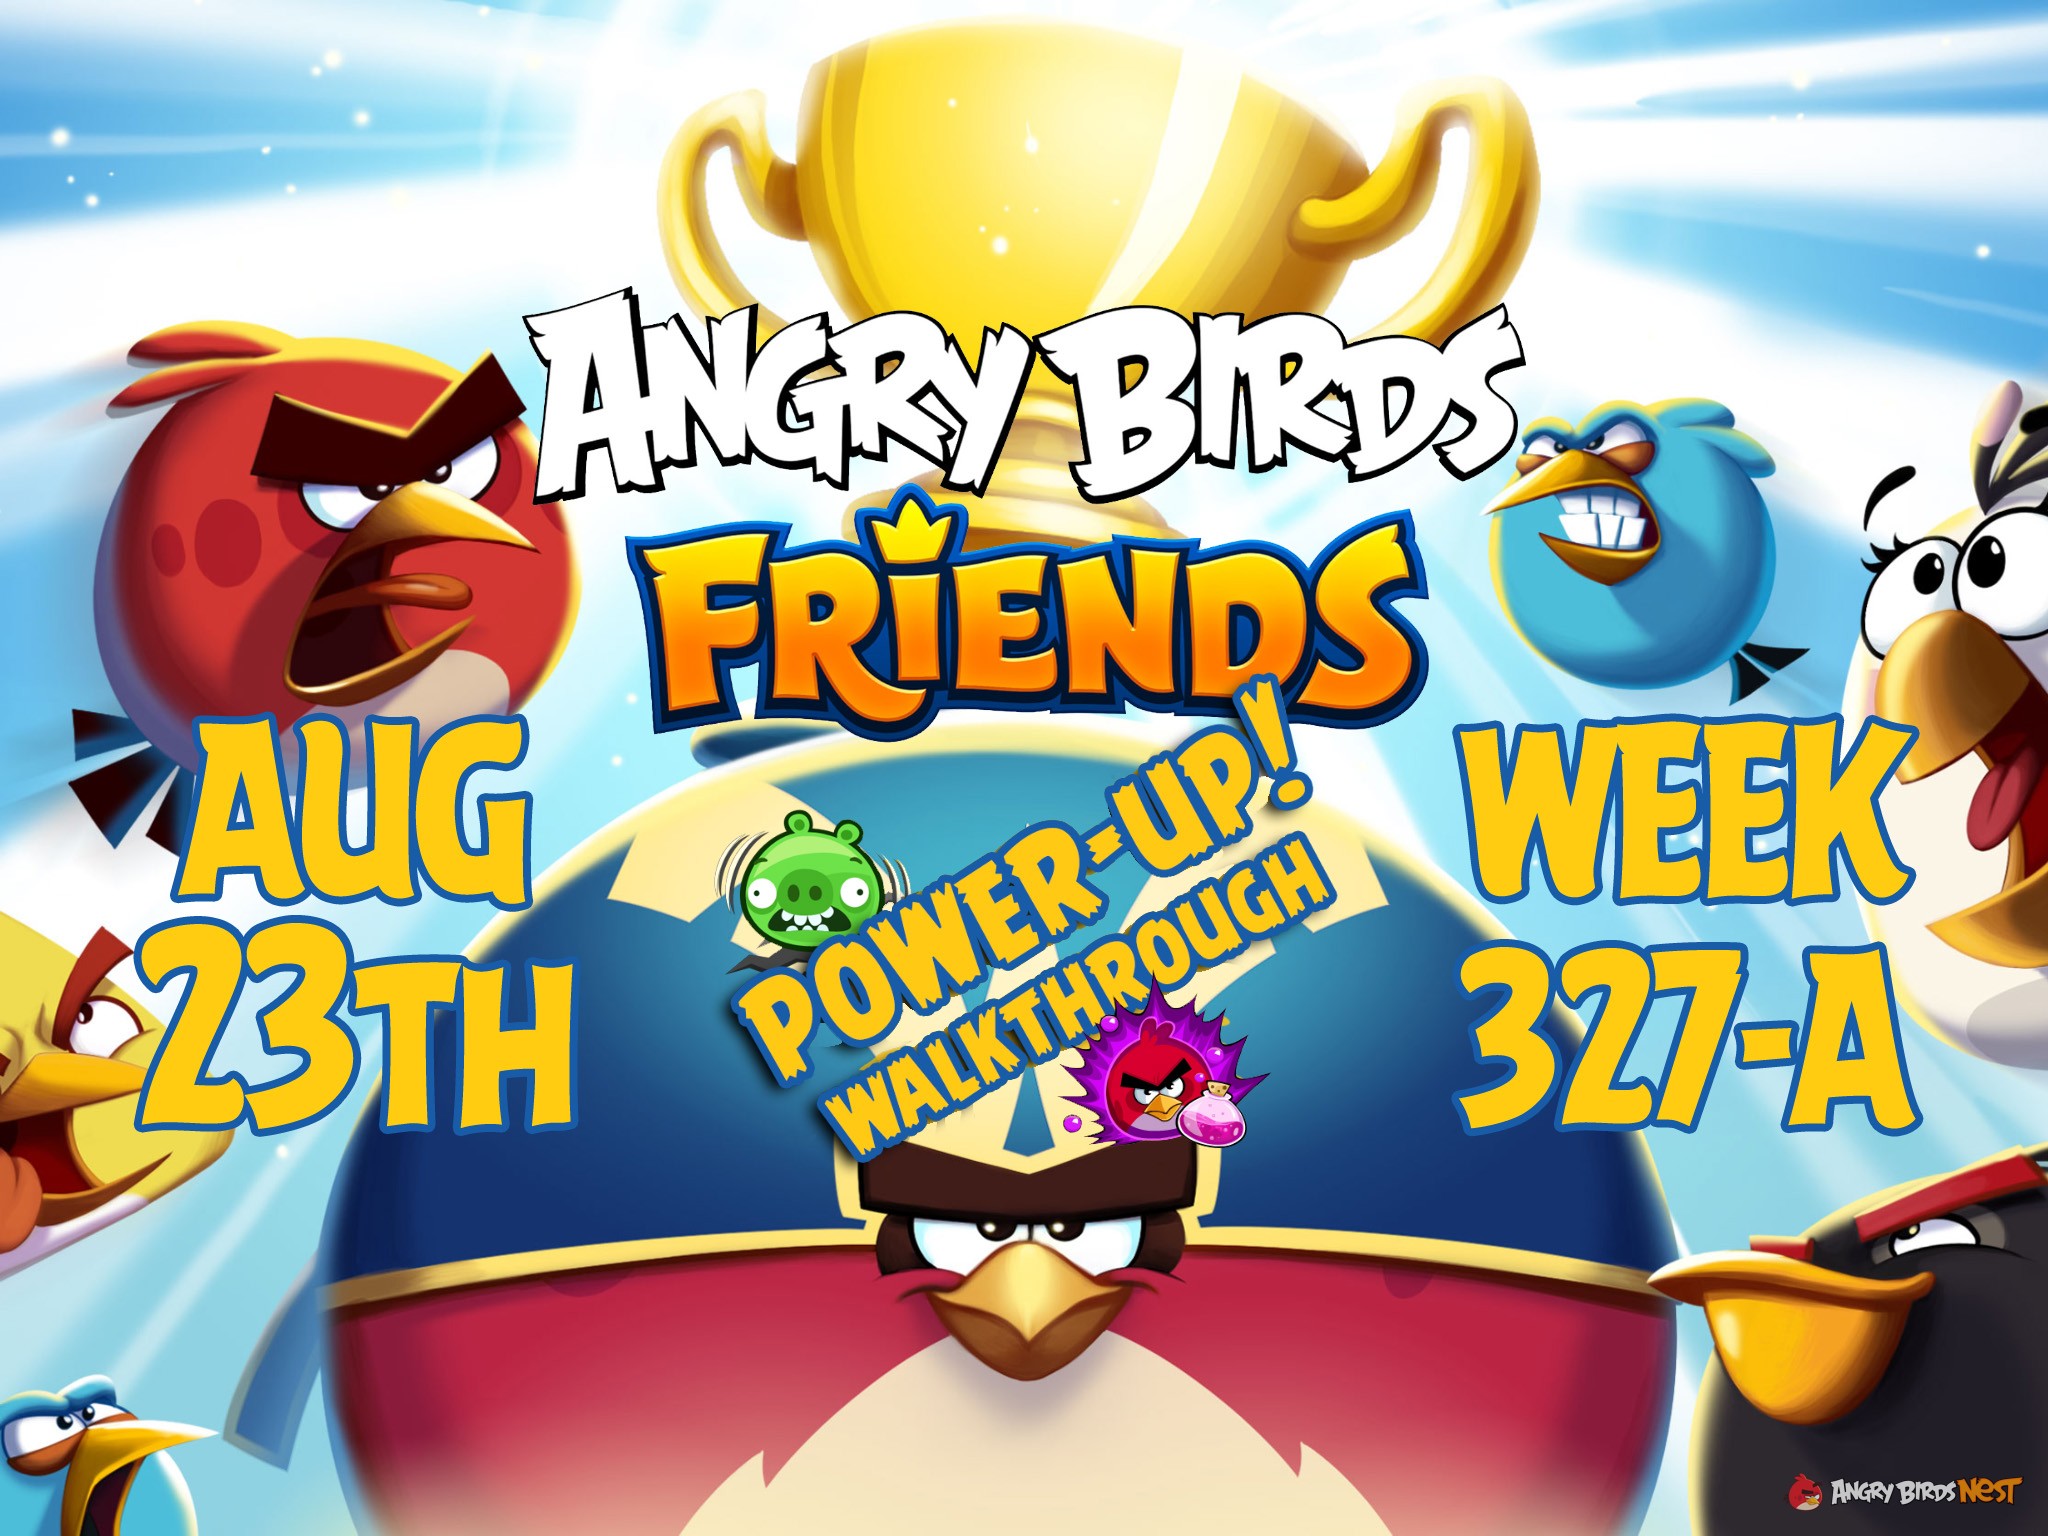 Angry-Birds-Friends-Tournament-Week-327-A-Feature-Image-PU